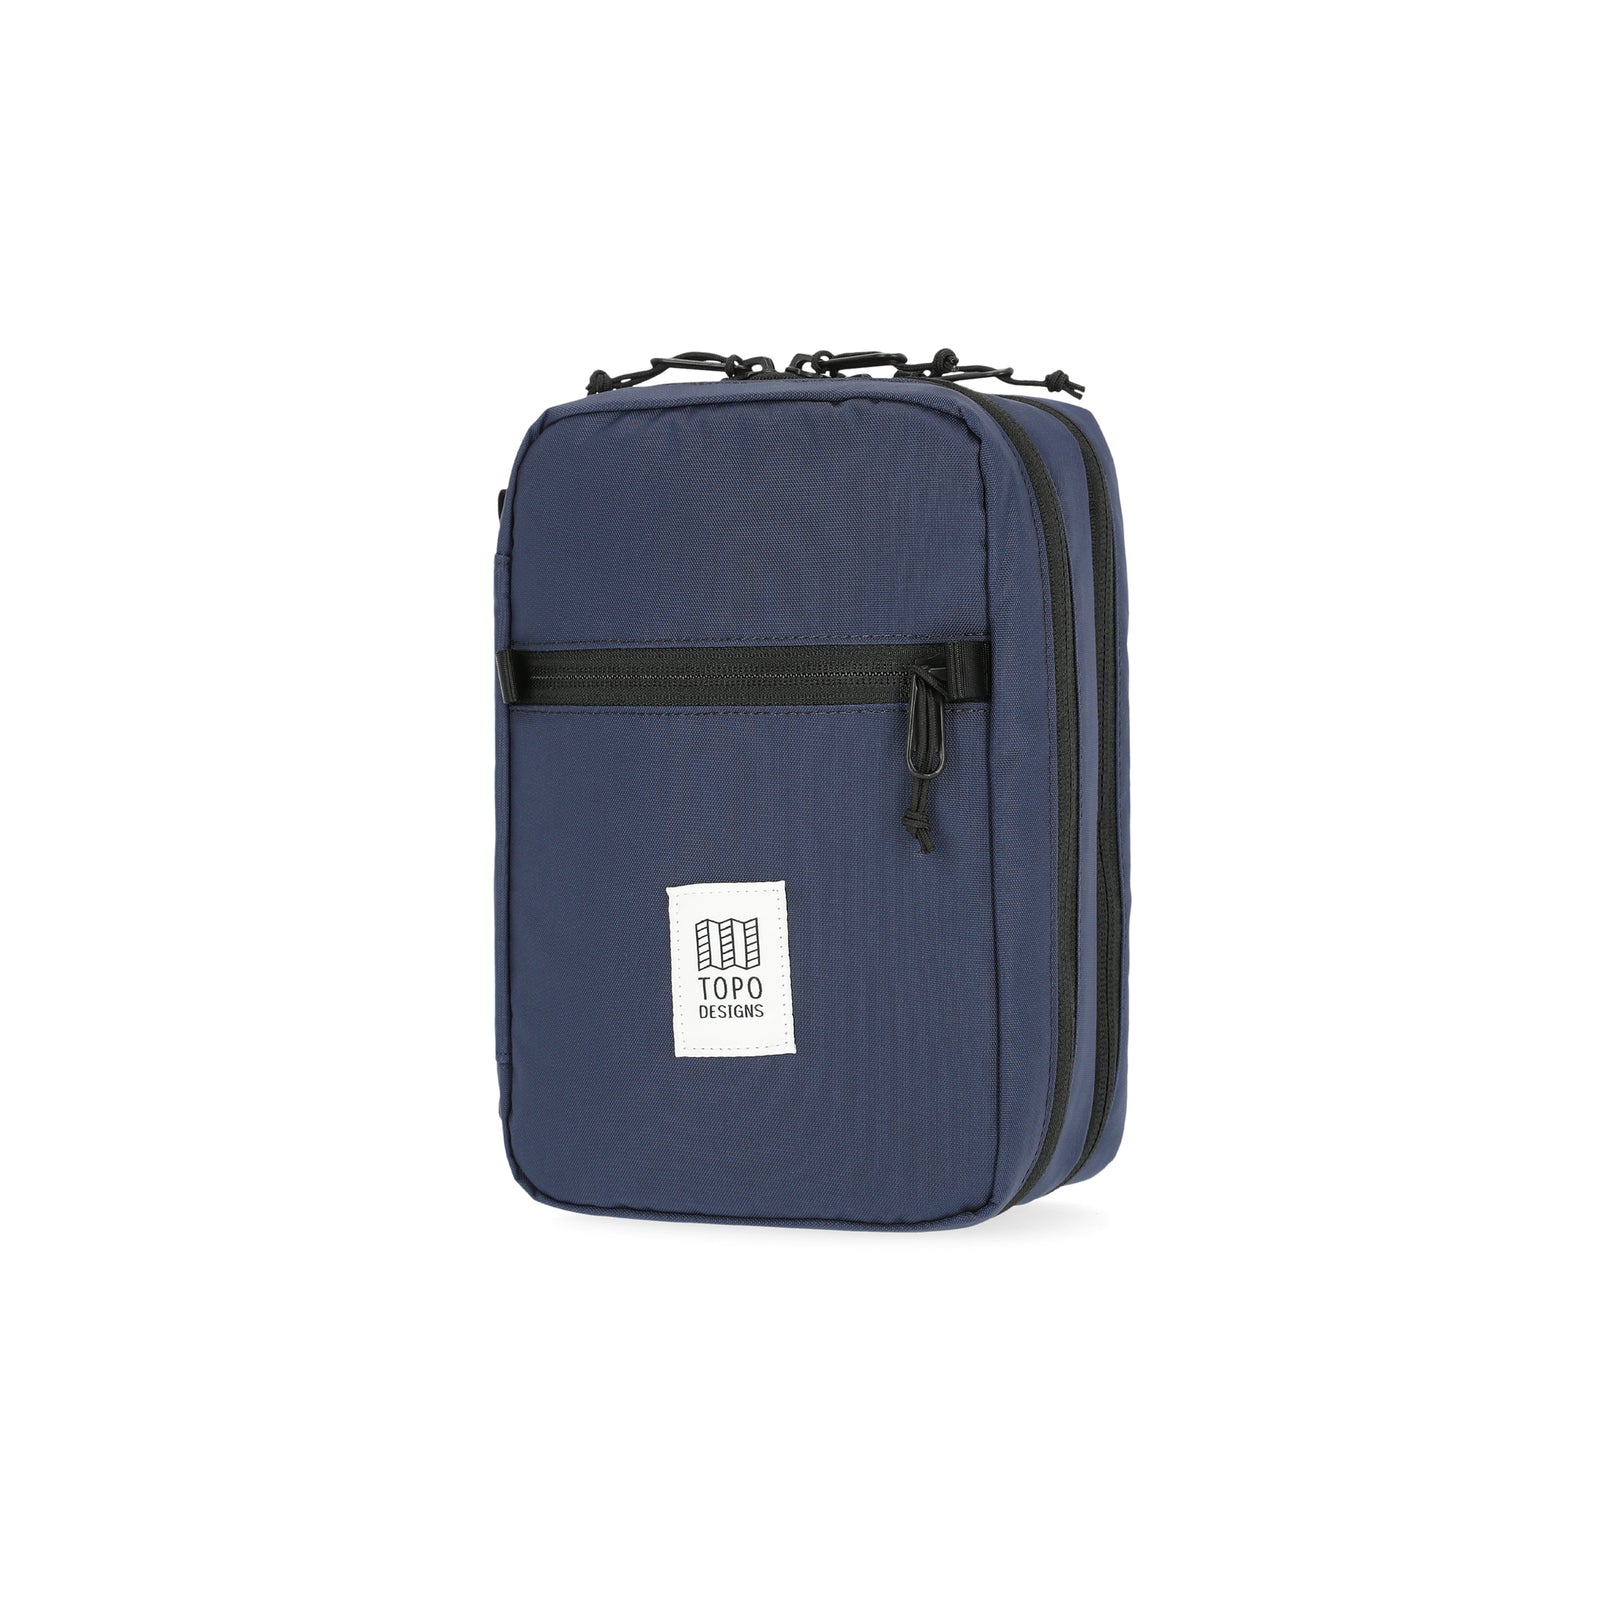 Topo Designs Tech electronics organization travel Case in "Navy" blue recycled nylon.